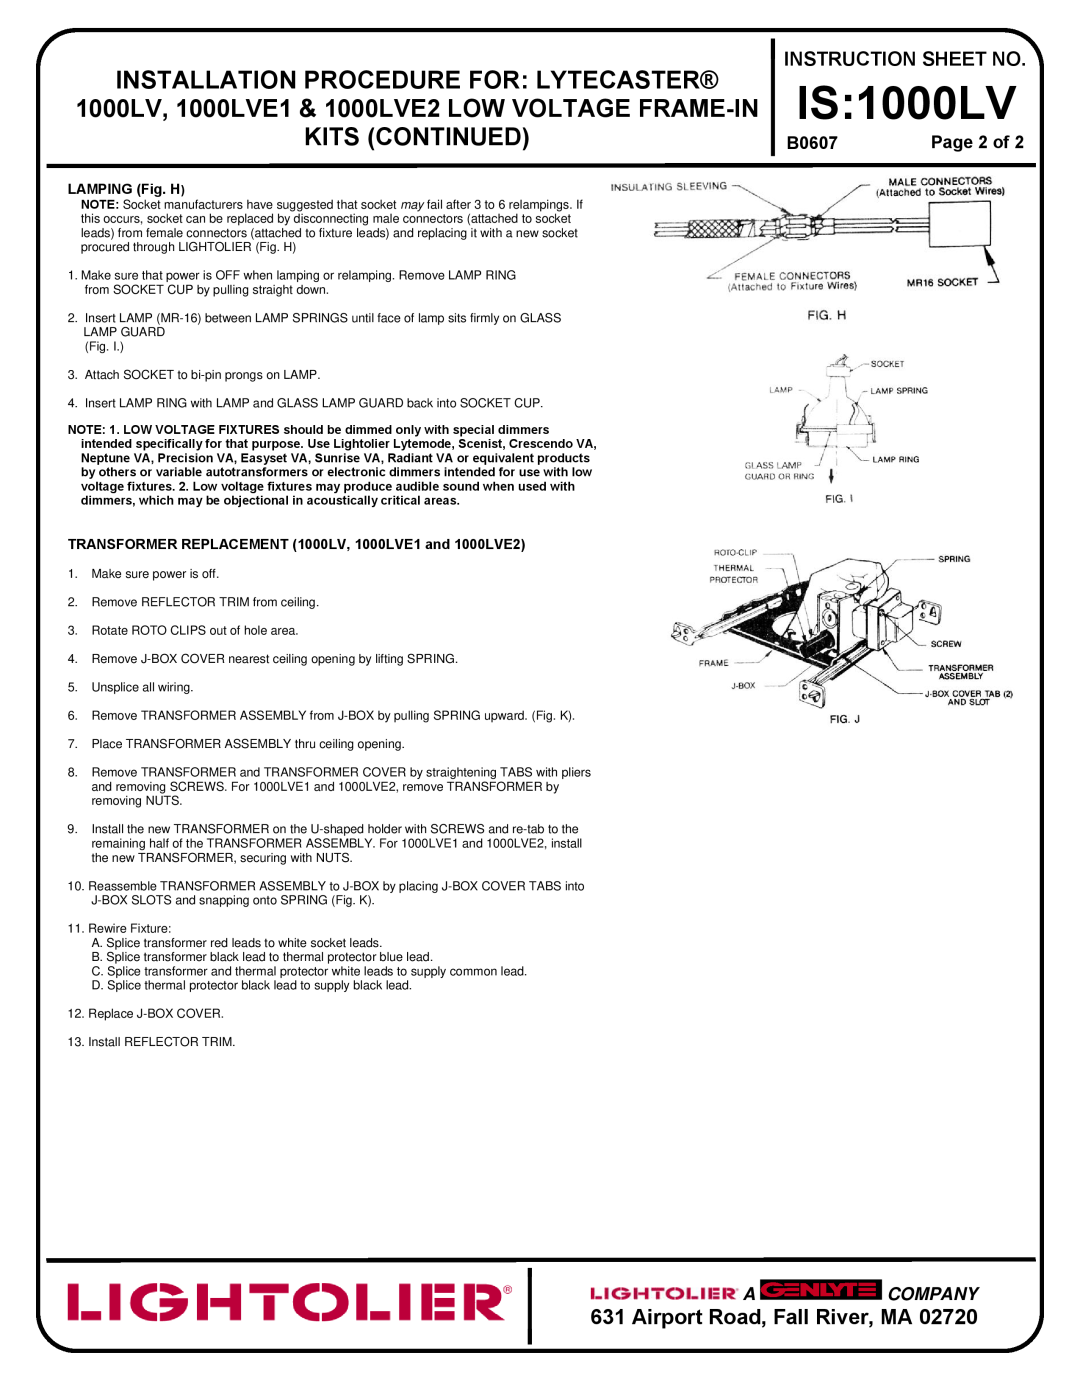 Lightolier IS:1000LV Instruction Sheet No, Page 2 of, IS 1000LV, Installation Procedure For Lytecaster, Kits Continued 